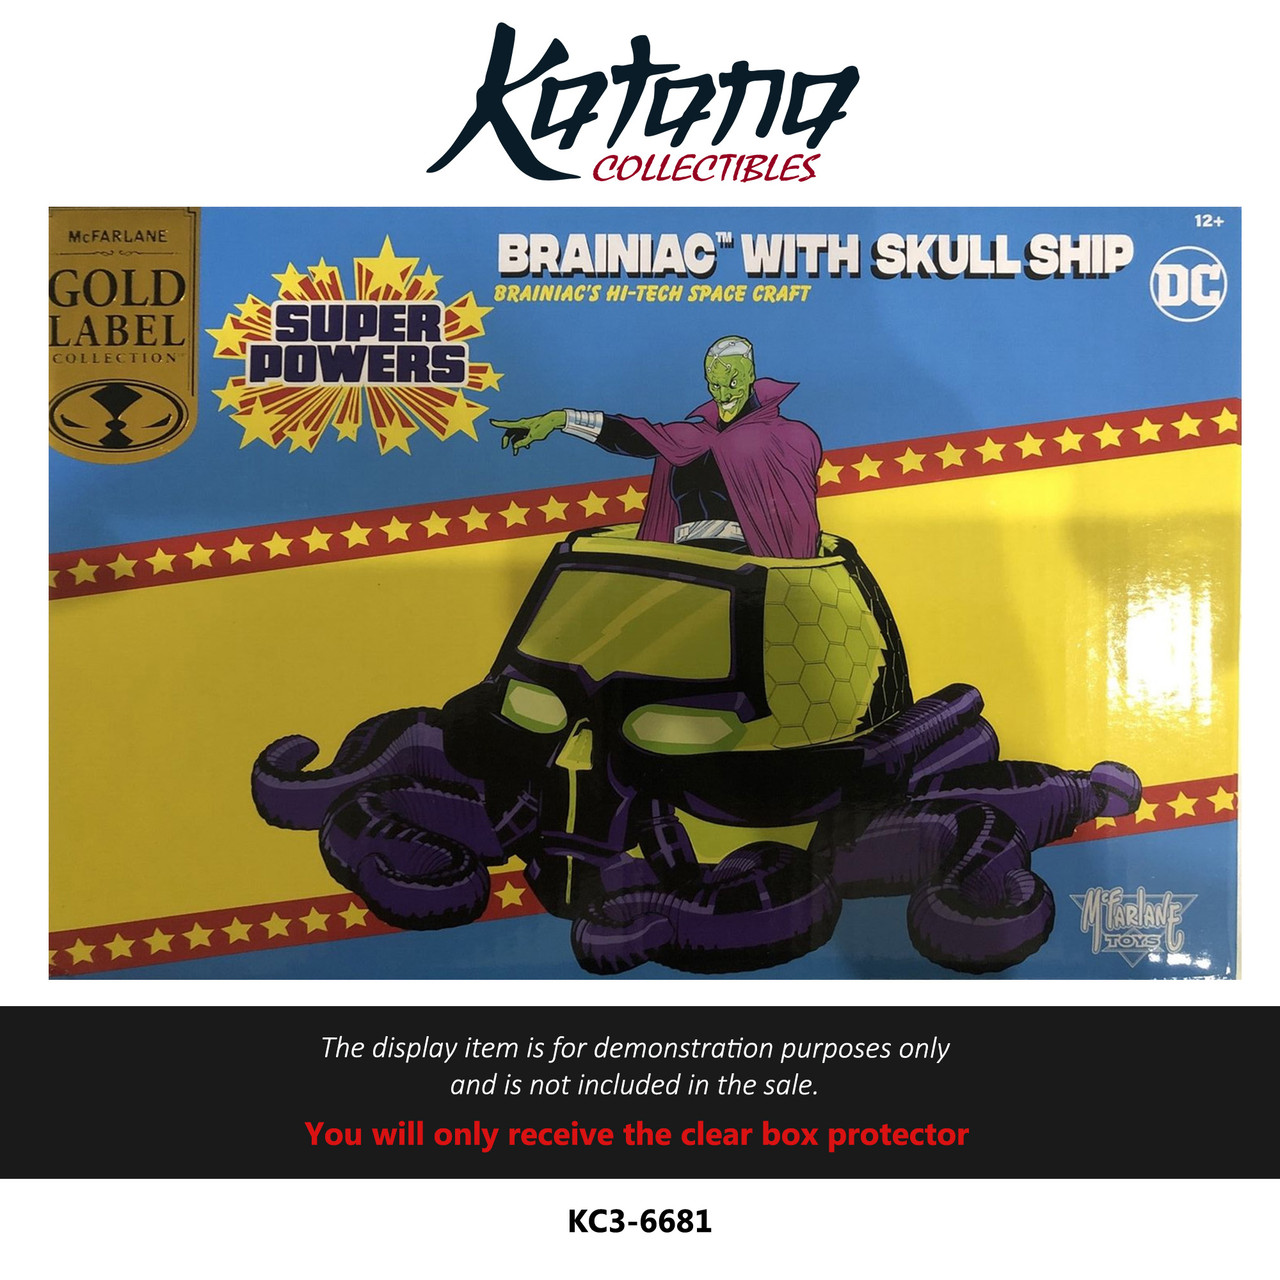 Katana Collectibles Protector For McFarlane Gold Label Super Powers Brainiac With Skull Ship